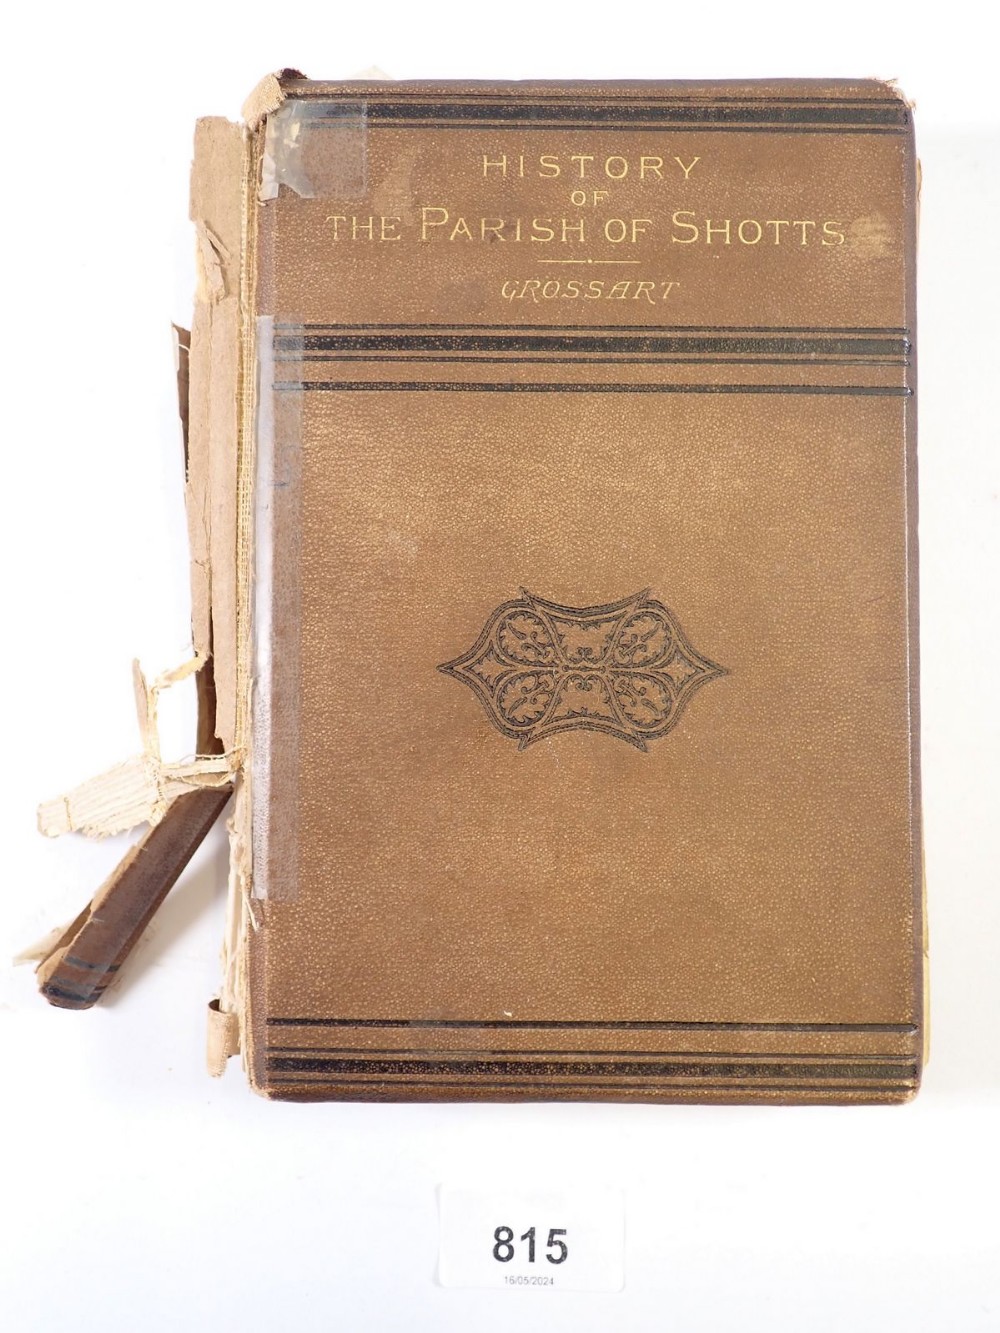 Historic Notices and Domestic History of the Parish of Shotts by William Grossart 1880, loose